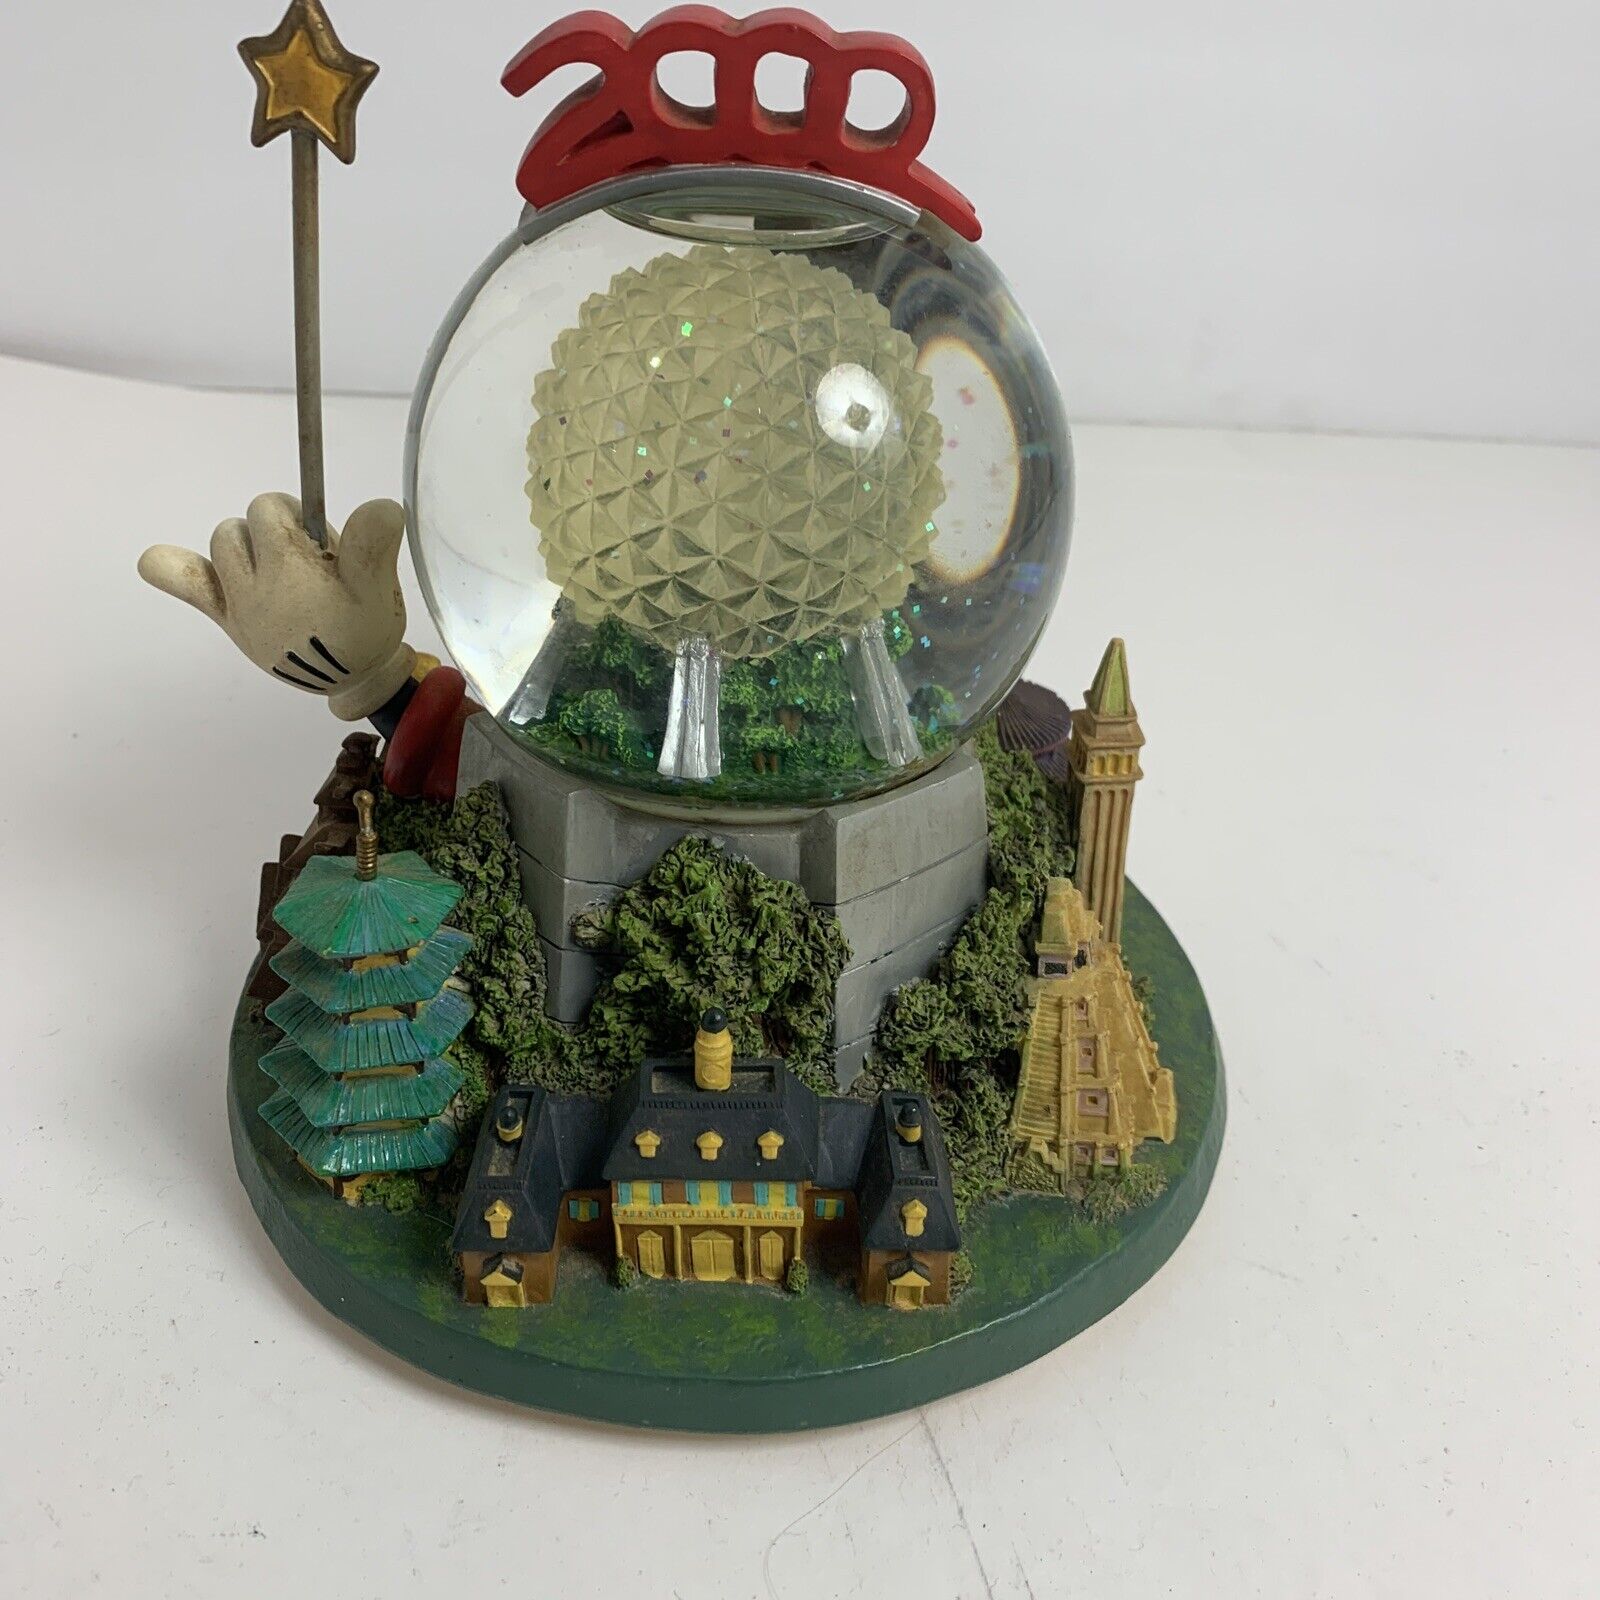 Collectible Epcot 2000 Snow Globe Plays 